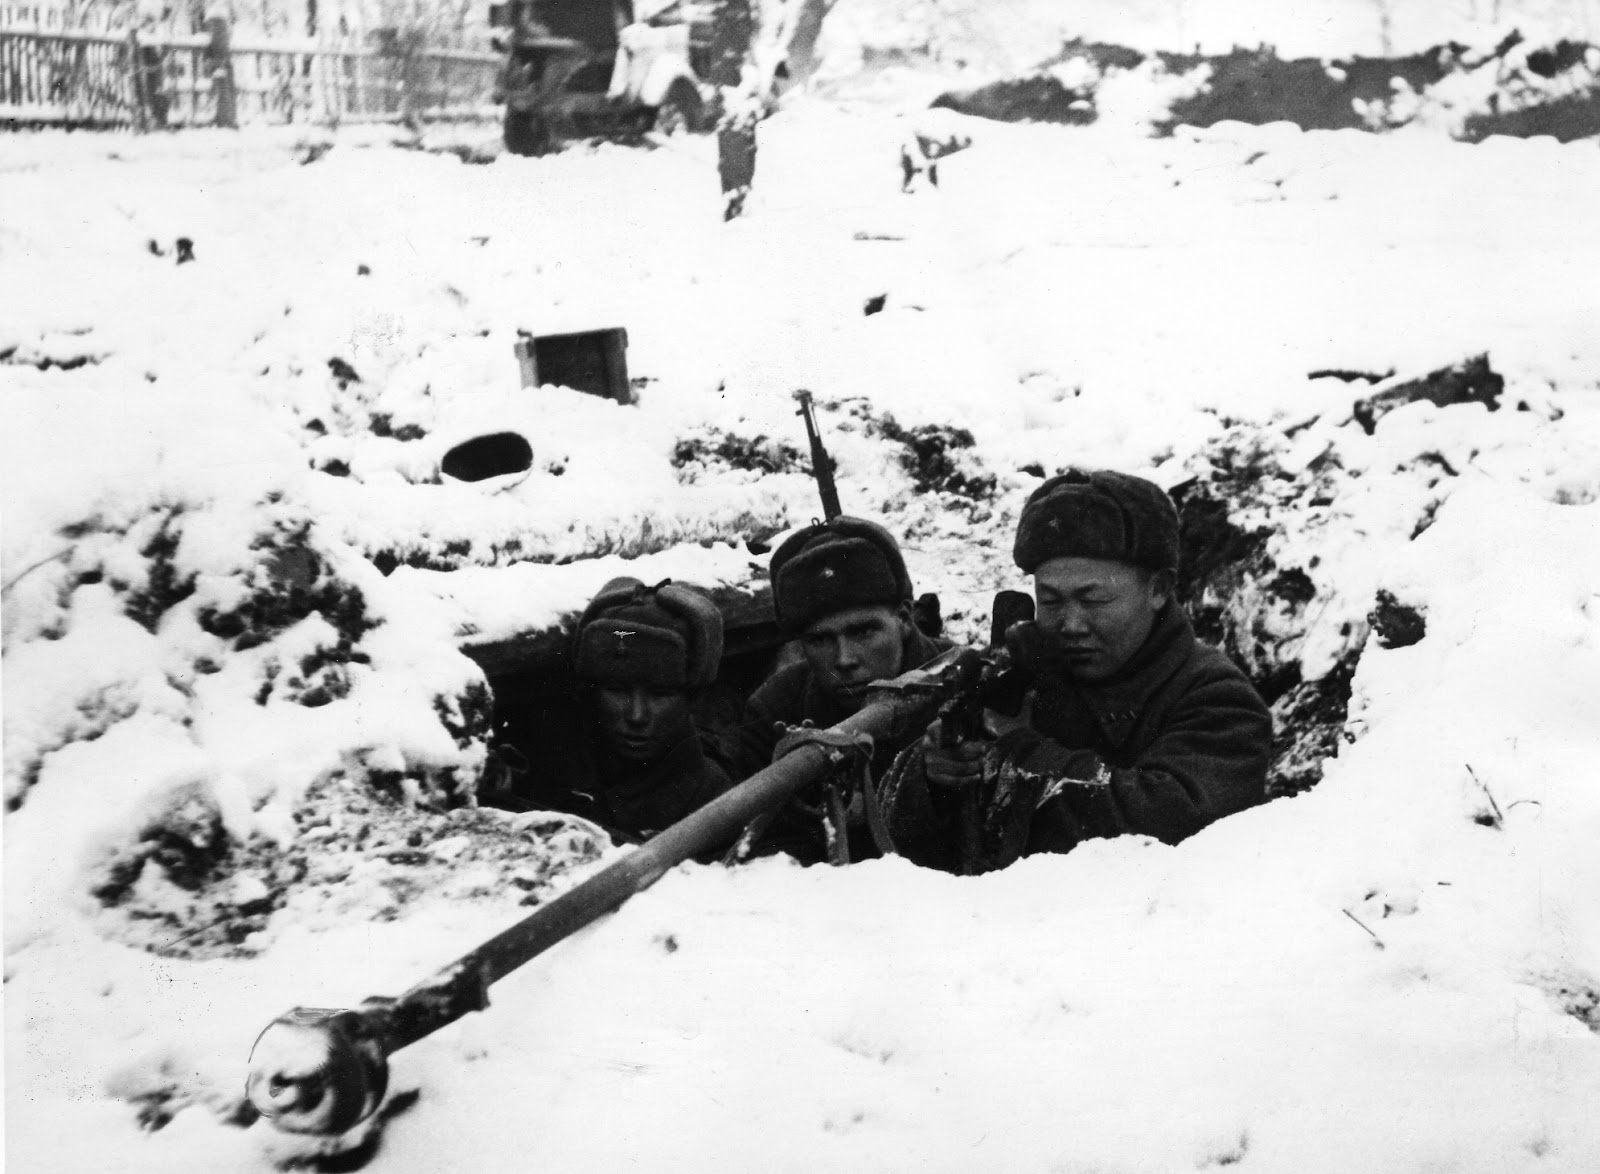 https://upload.wikimedia.org/wikipedia/commons/1/1e/Soviet_soldiers_with_PTRD-41_defending_Moscow.jpg